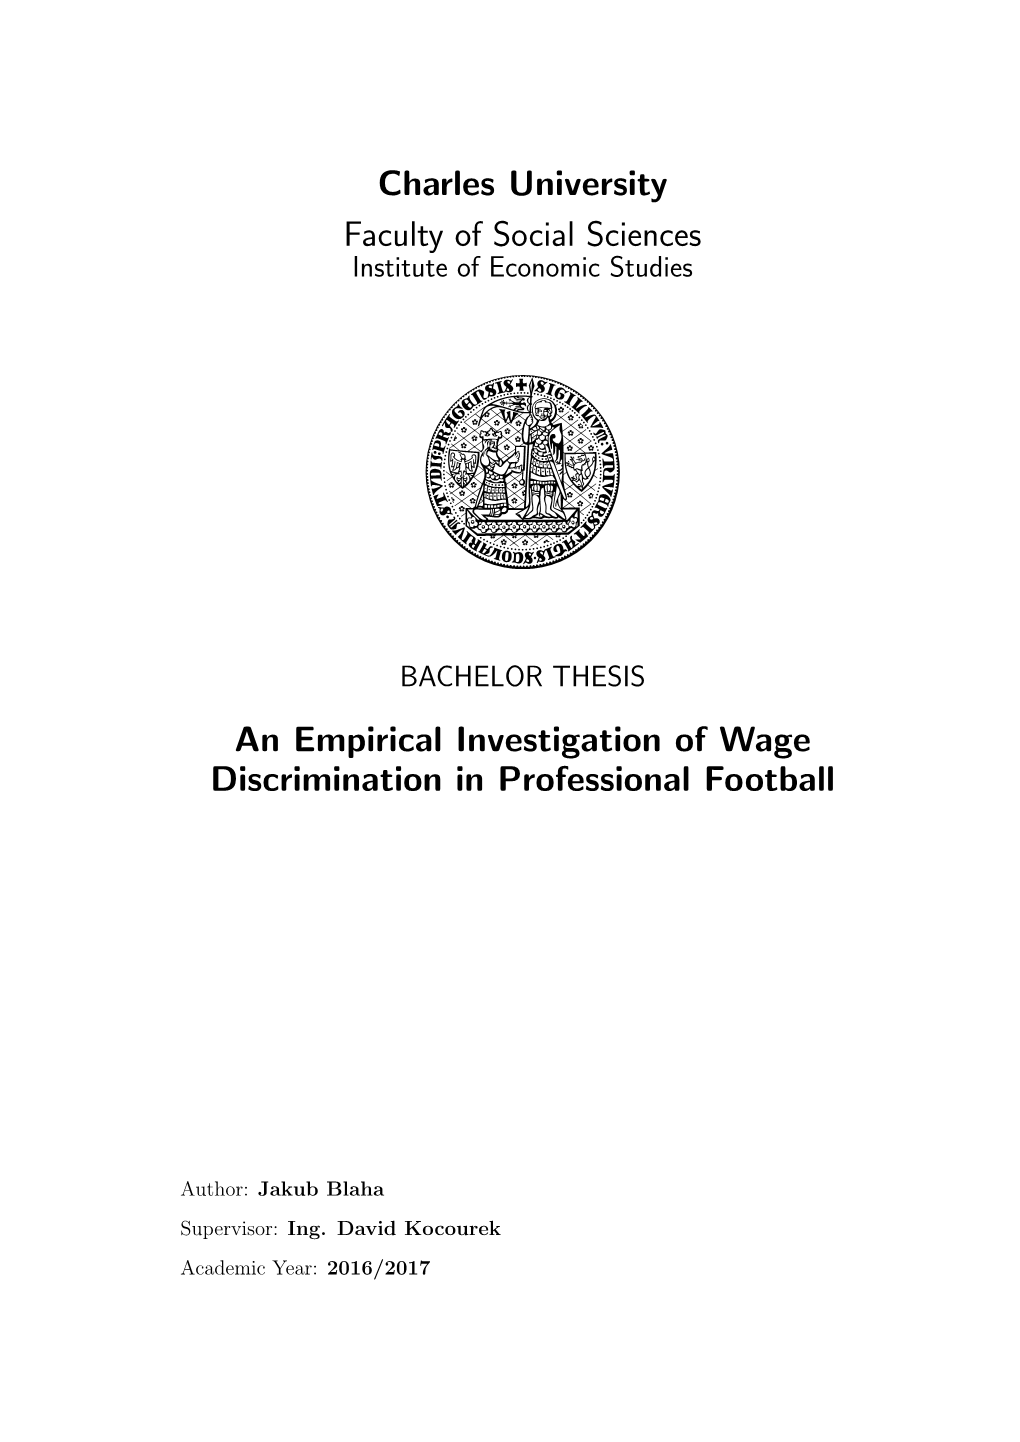 An Empirical Investigation of Wage Discrimination in Professional Football